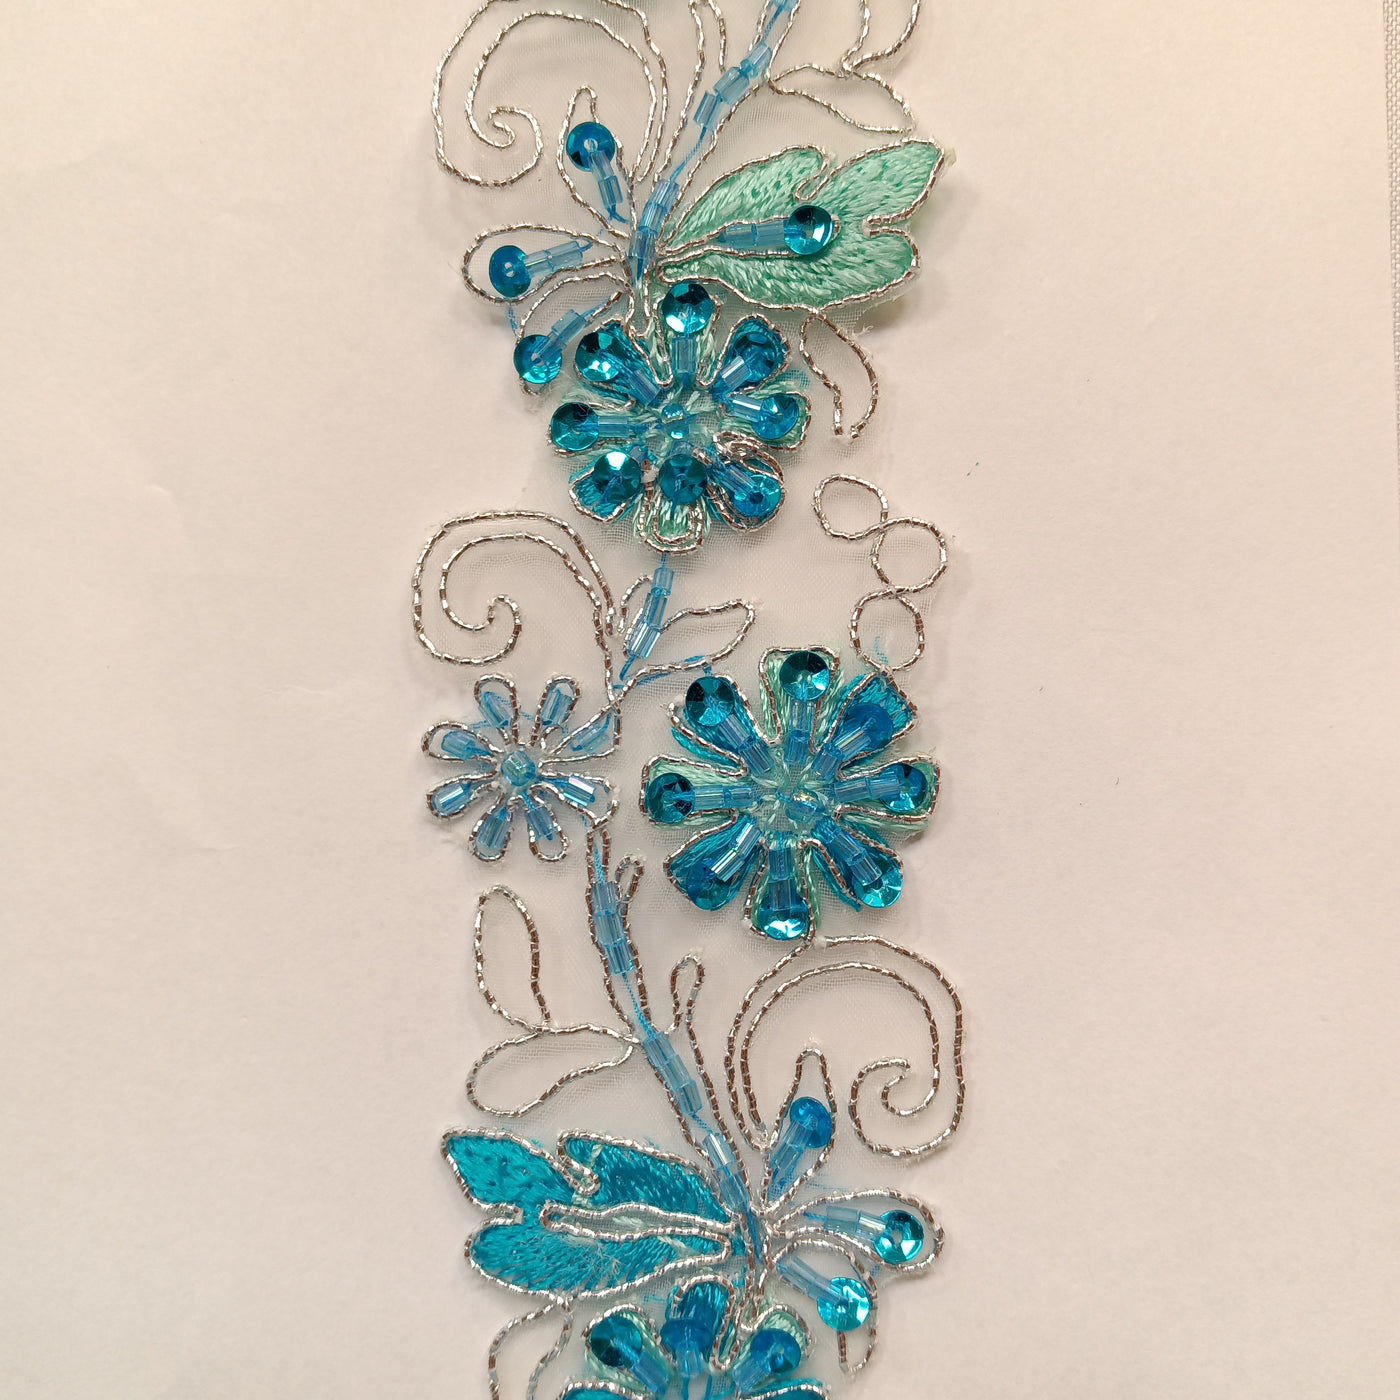 Beaded, Corded & Embroidered on Organza Turquoise with Silver Trimming. Lace Usa